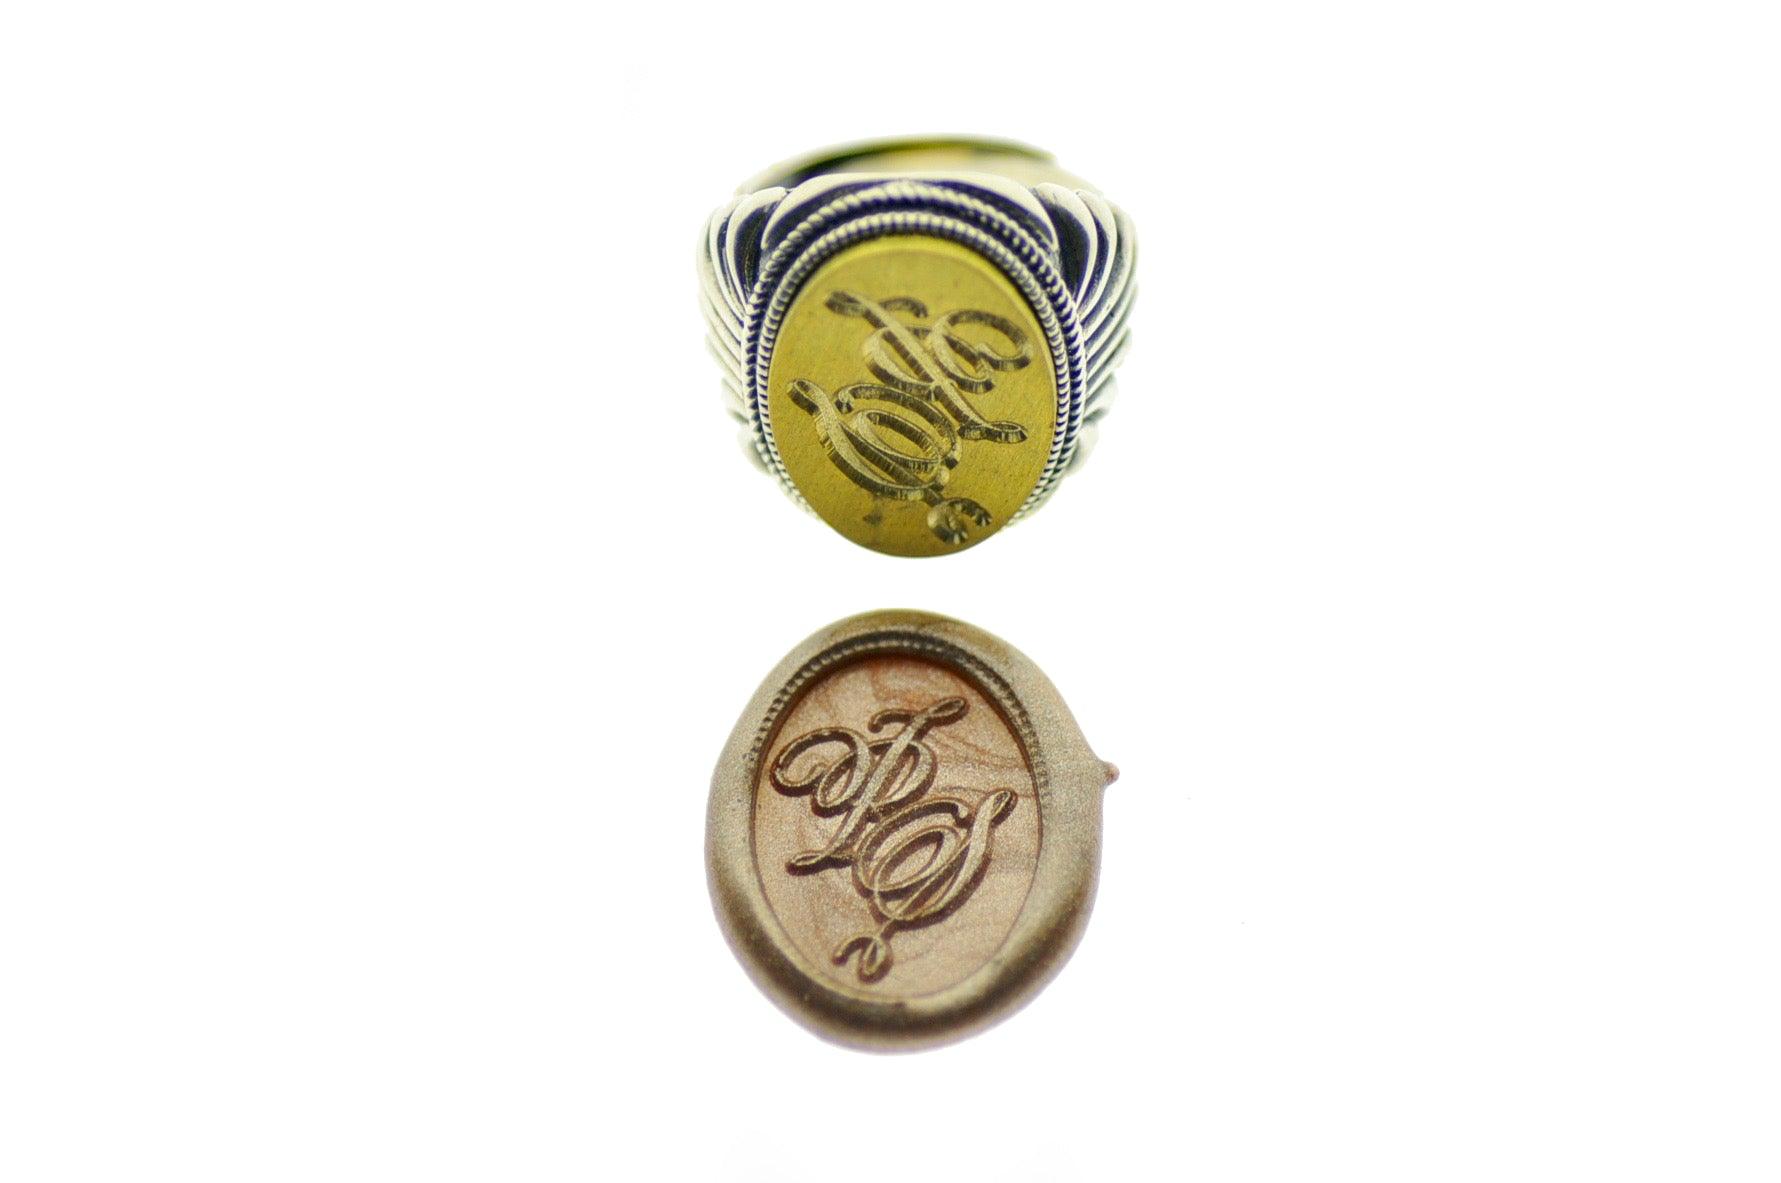 Calligraphy Double Initials Signet Ring - Backtozero B20 - 1520fan, 15x20mm, 2 initials, 2initials_no_and, accessory, bespoke, Custom, custom ring, Double Initials, him, initial ring, jewelry, Monogram, oval, oval ring, Personalized, ring, signet ring, size 10, size 11, size 8, size 9, Two initials, wax seal, wax seal ring